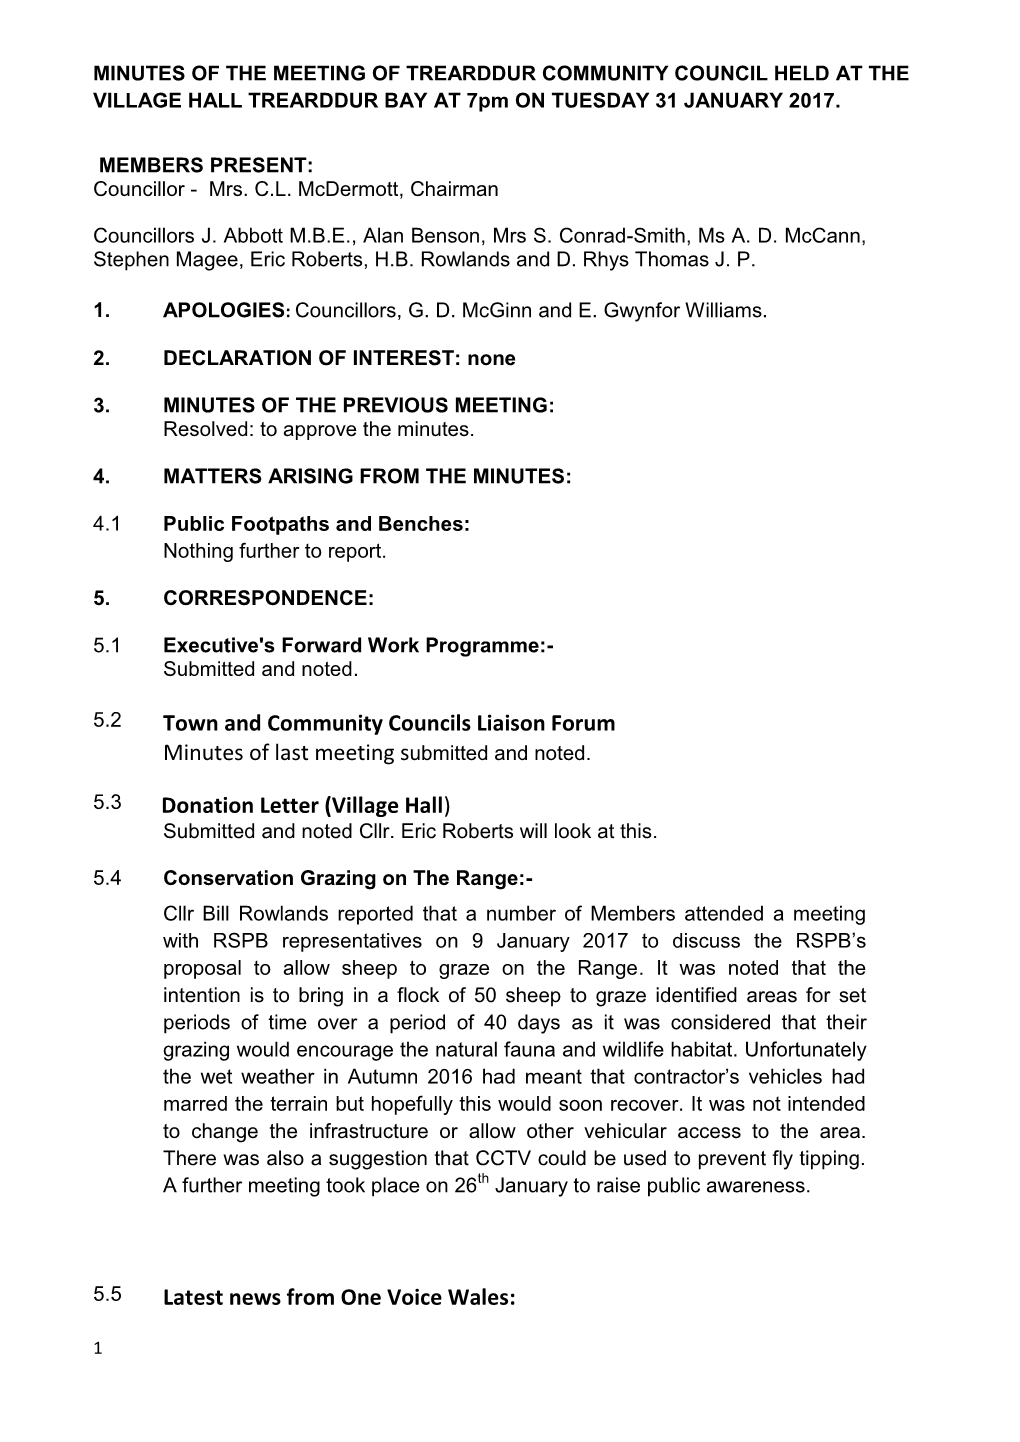 Town and Community Councils Liaison Forum Minutes of Last Meeting Submitted and Noted